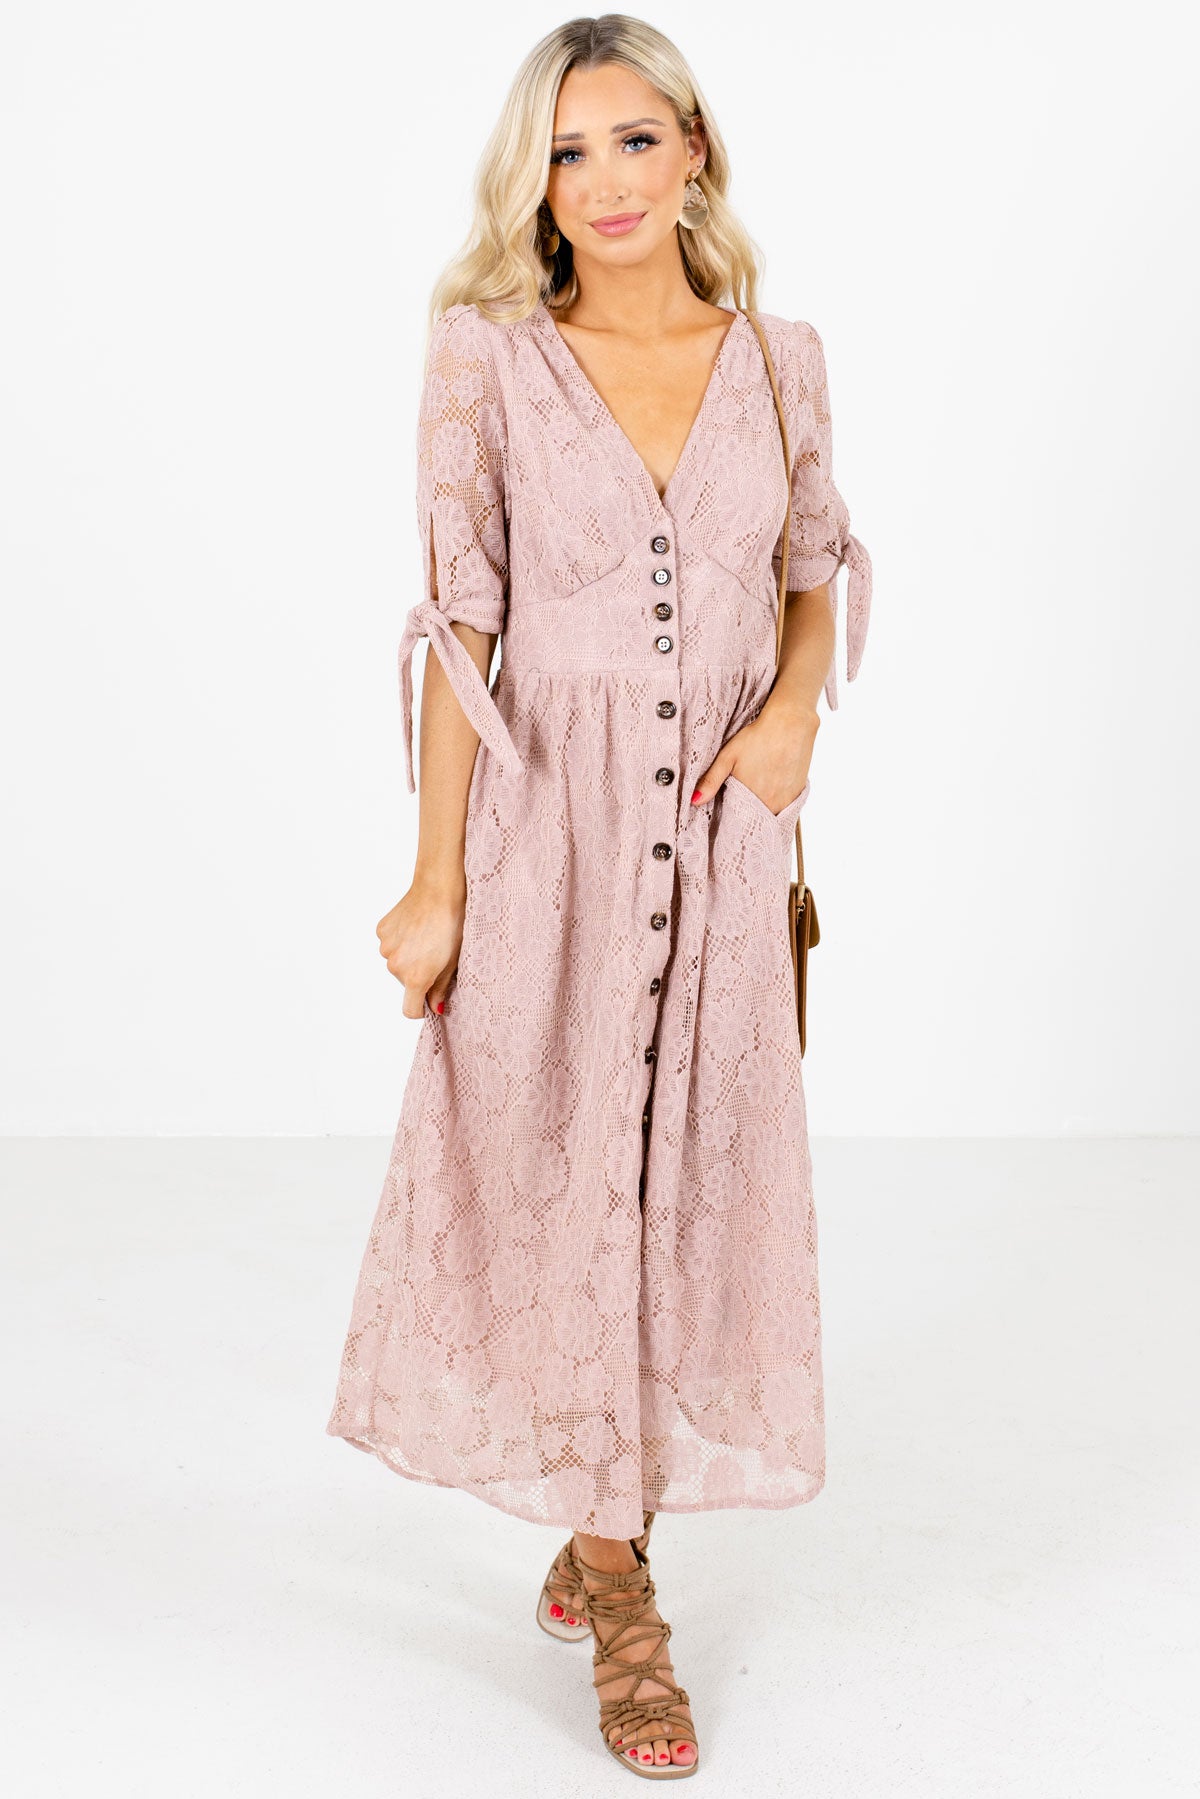 Pink Self-Tie Sleeve Boutique Midi Dresses for Women